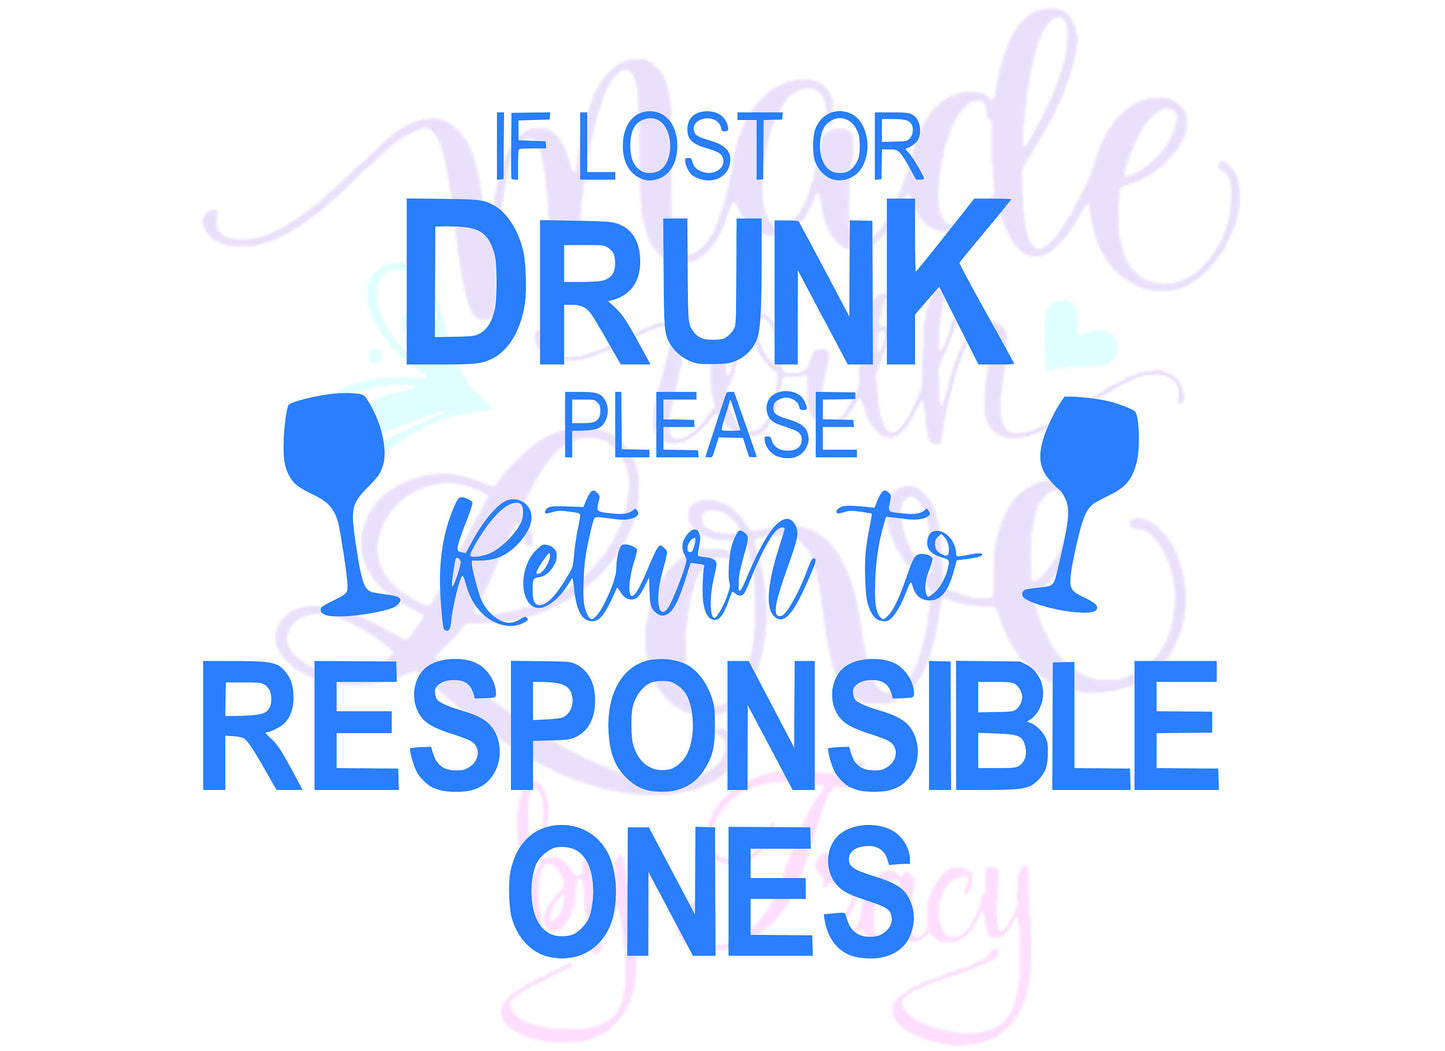 be responsible clipart